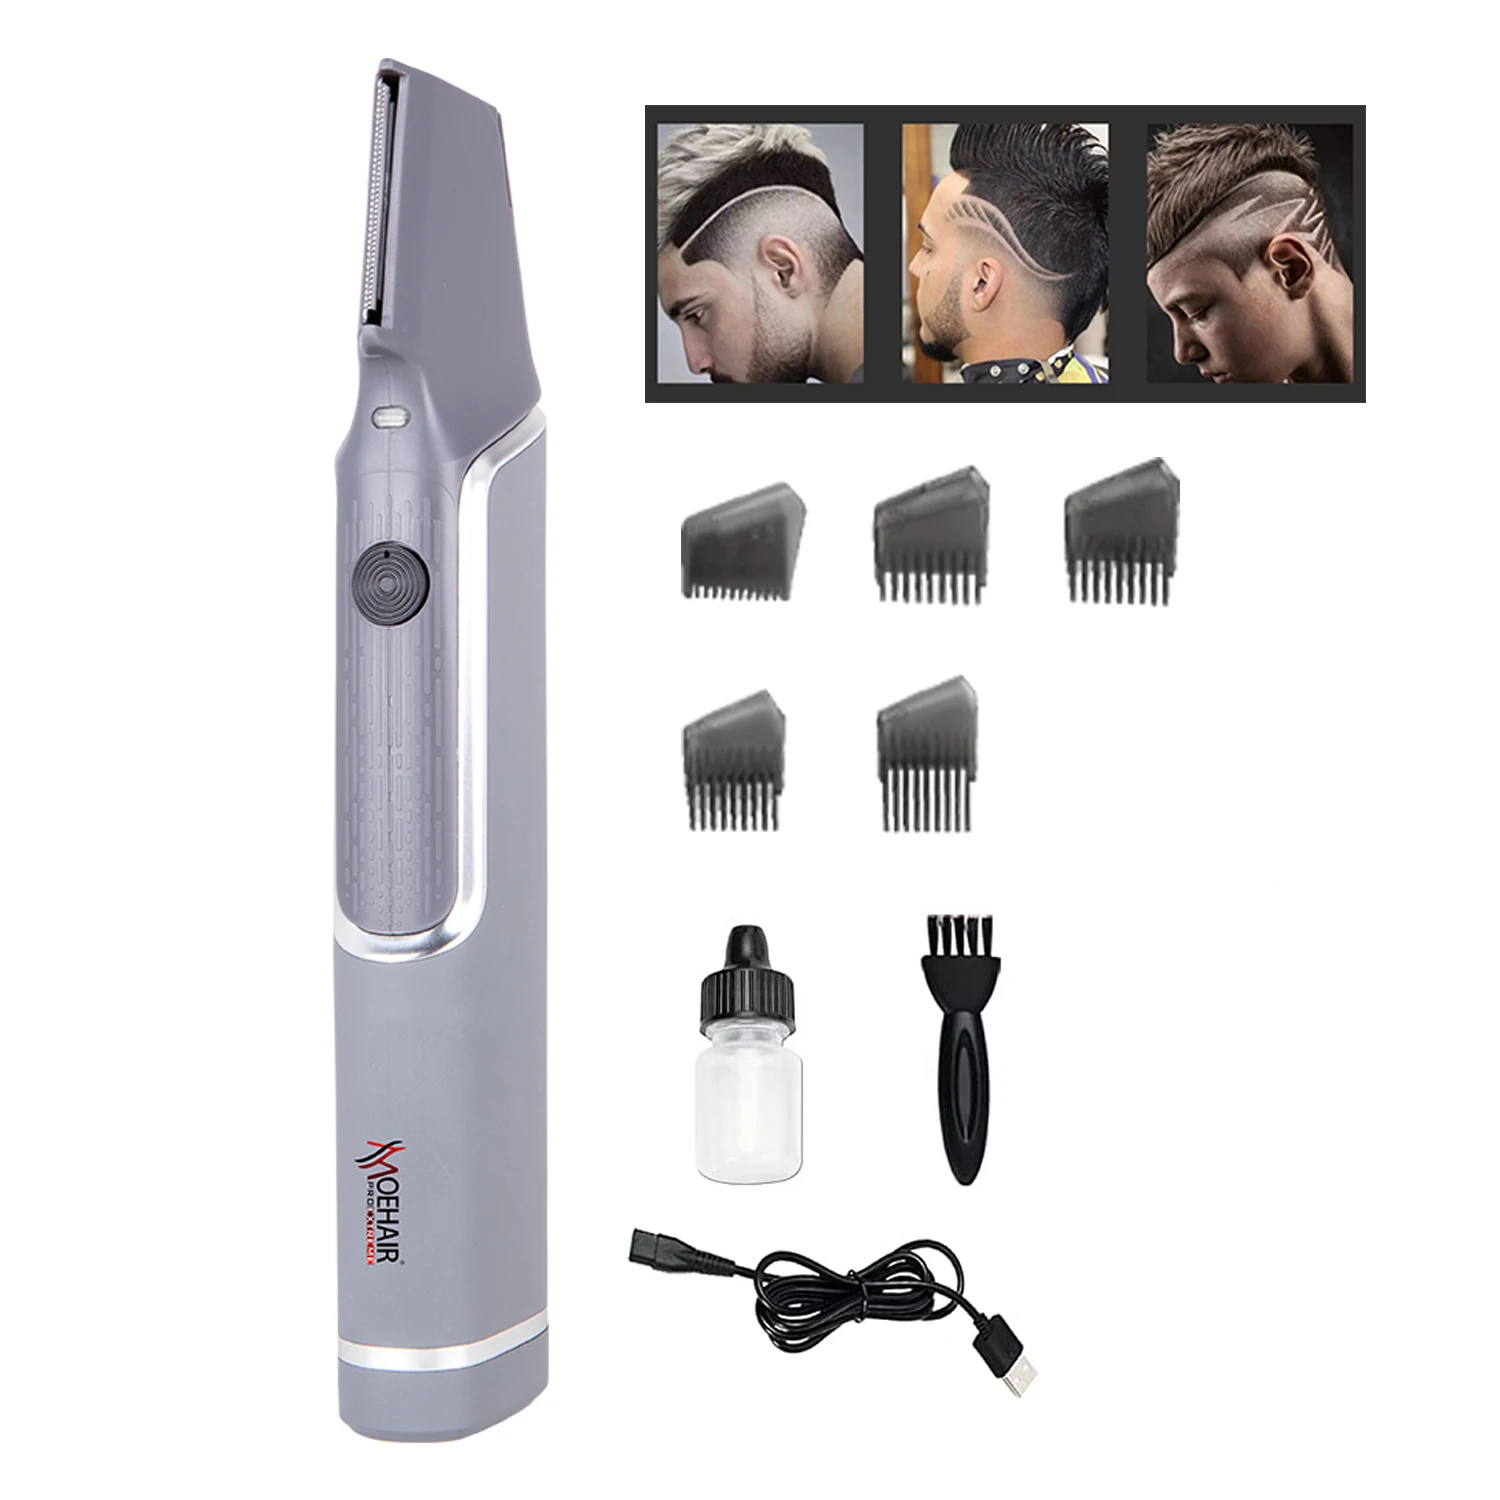 V Shape Shaver Beard Trimmer For Men Professional Cordless Hair Clippers  Cutting Kit Grooming Folding Adjustable Hair Trimmer - Buy Beard  Trimmer,Shaver Beard Trimmer,Beard Trimmer For Men Product on 